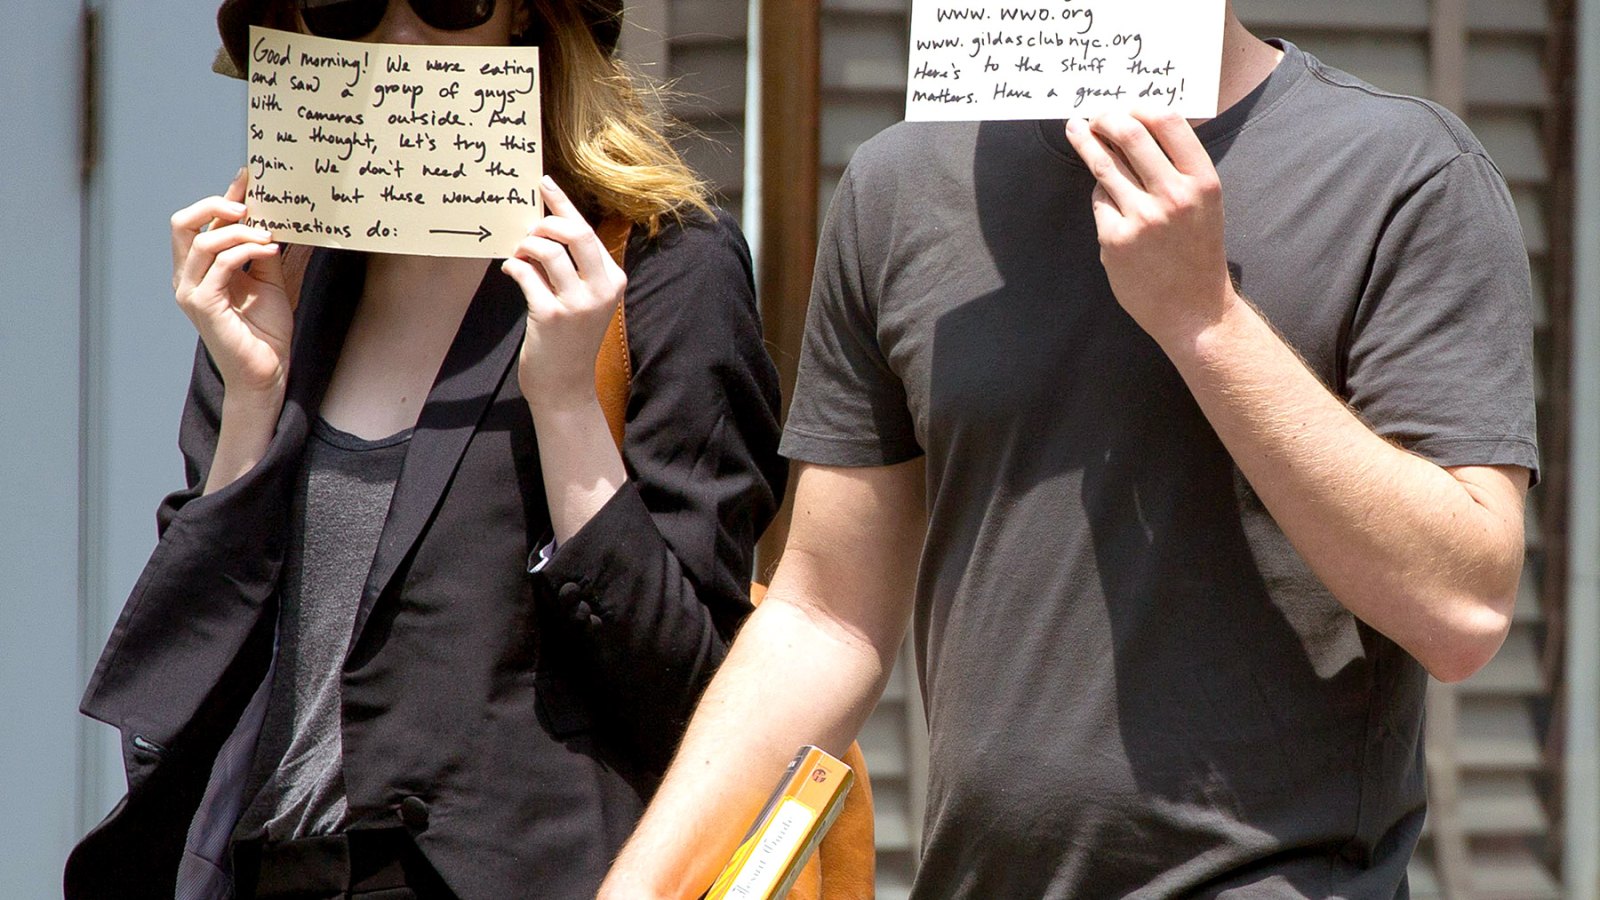 Emma Stone and Andrew Garfield share a message on signs on June 17